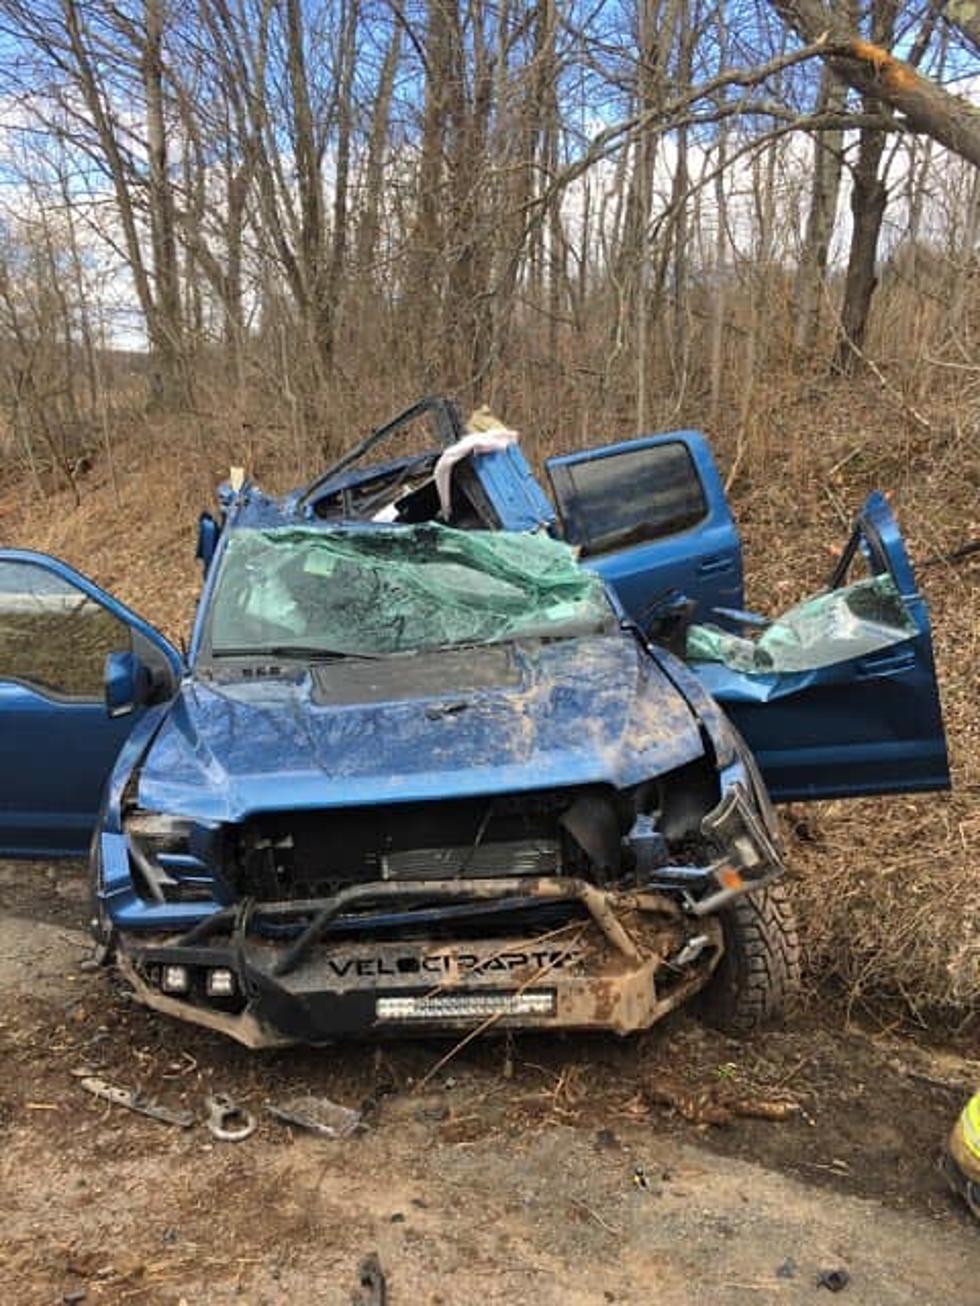 One Injured in Franklin Auto Crash; Driver Airlifted to Hospital